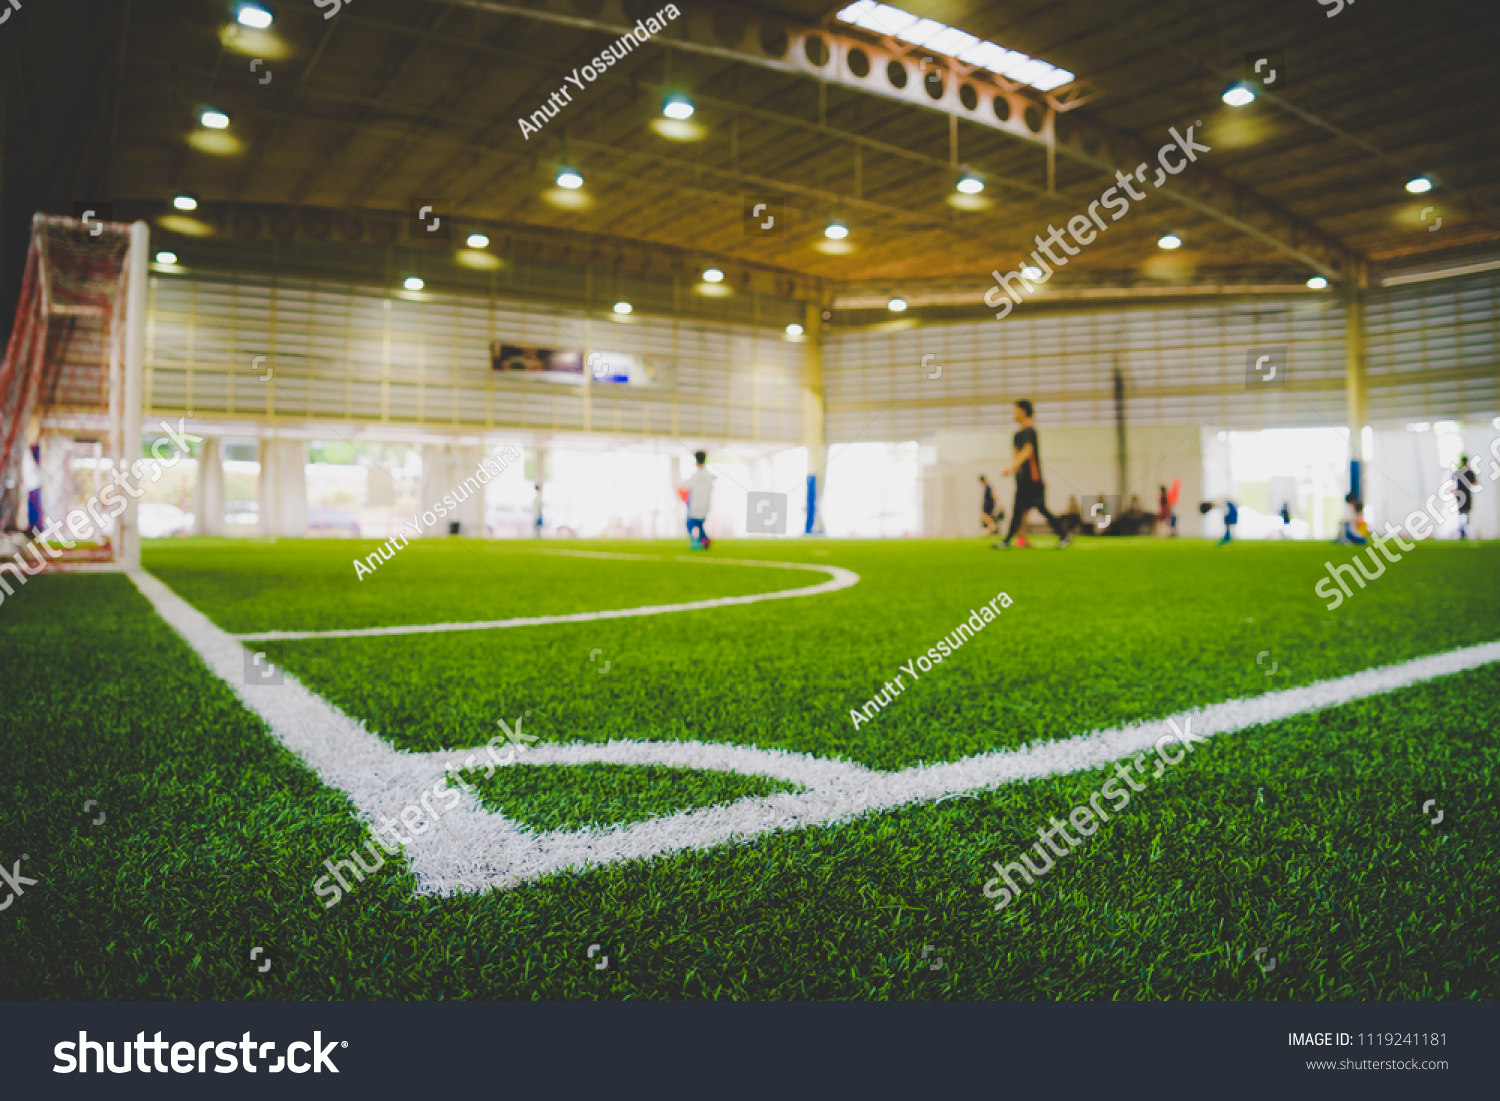 Corner Line of an indoor football soccer training field in Junior Soccer Academy school with blurred children and coach practicing on the background #1119241181